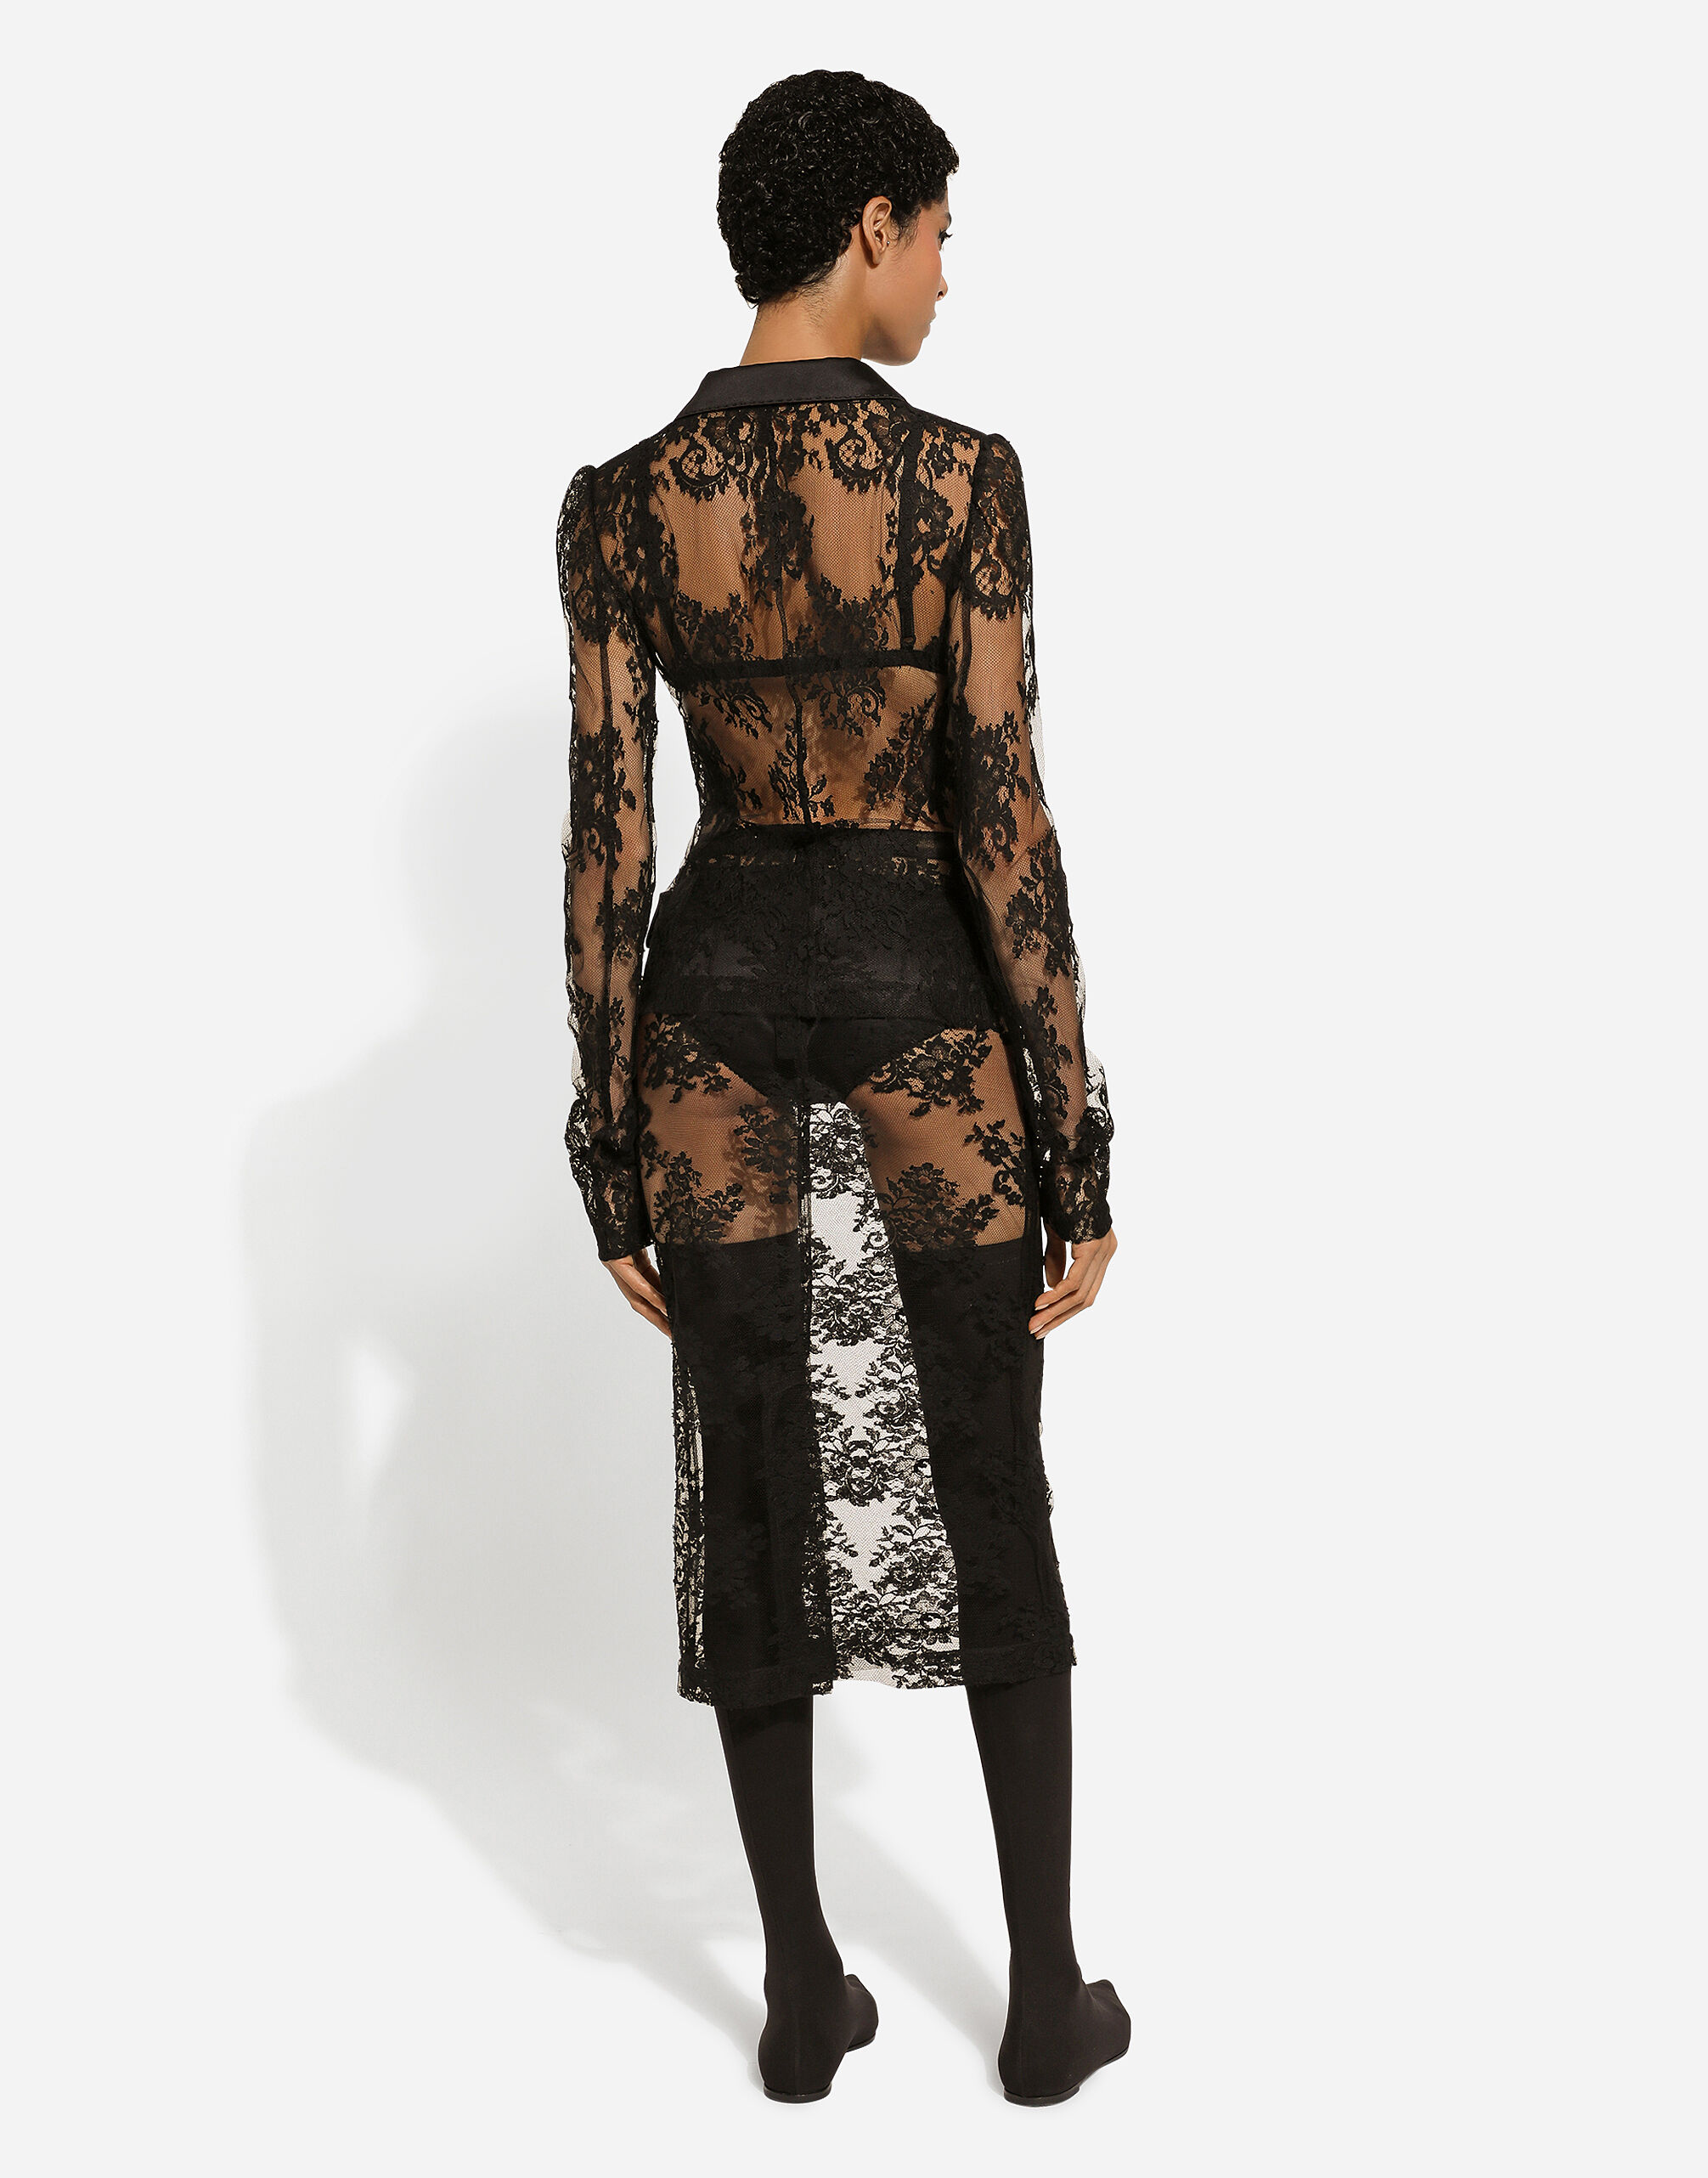 Floral lace jacket with satin details in Black for Women 